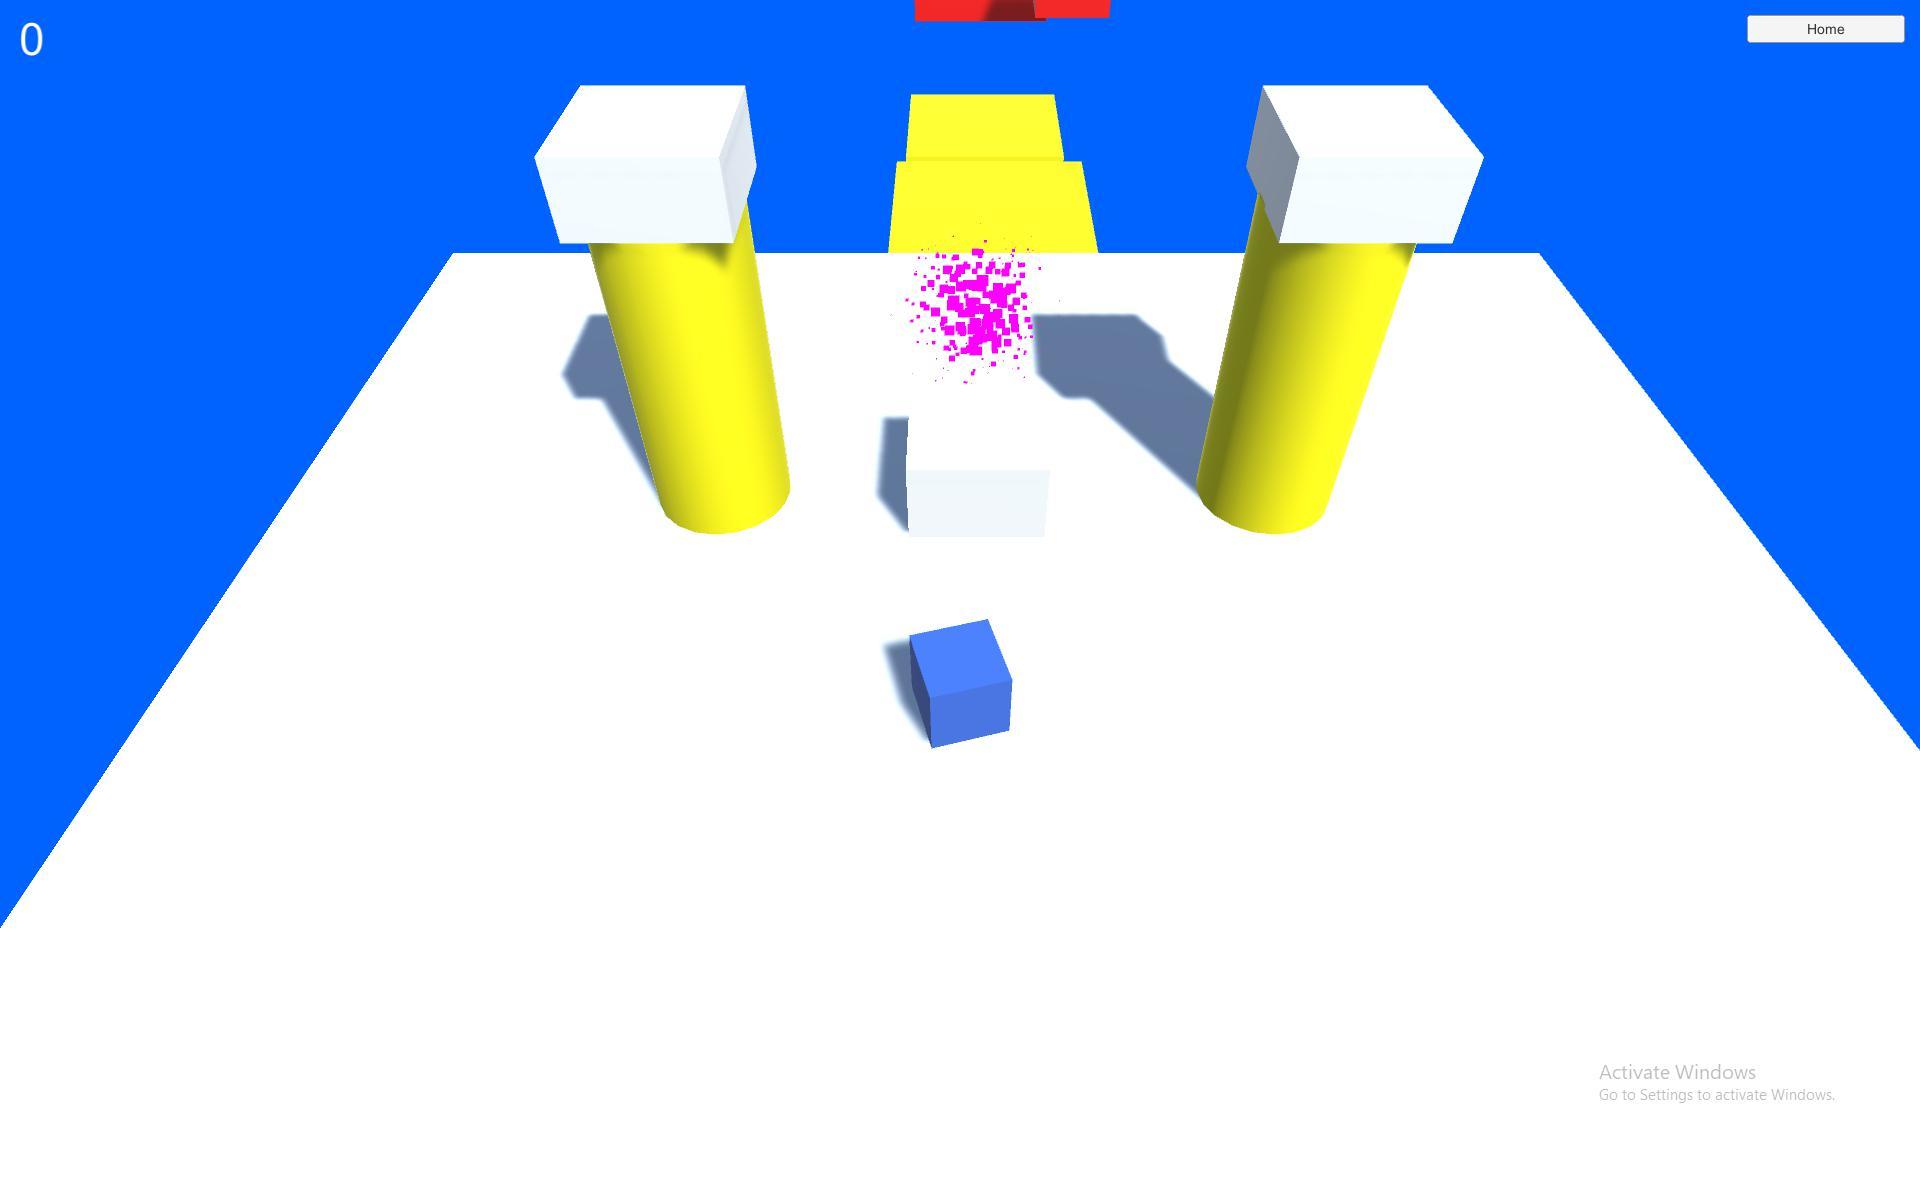 Cubic games. Cubic game where you need to search for Parts to build your own body.